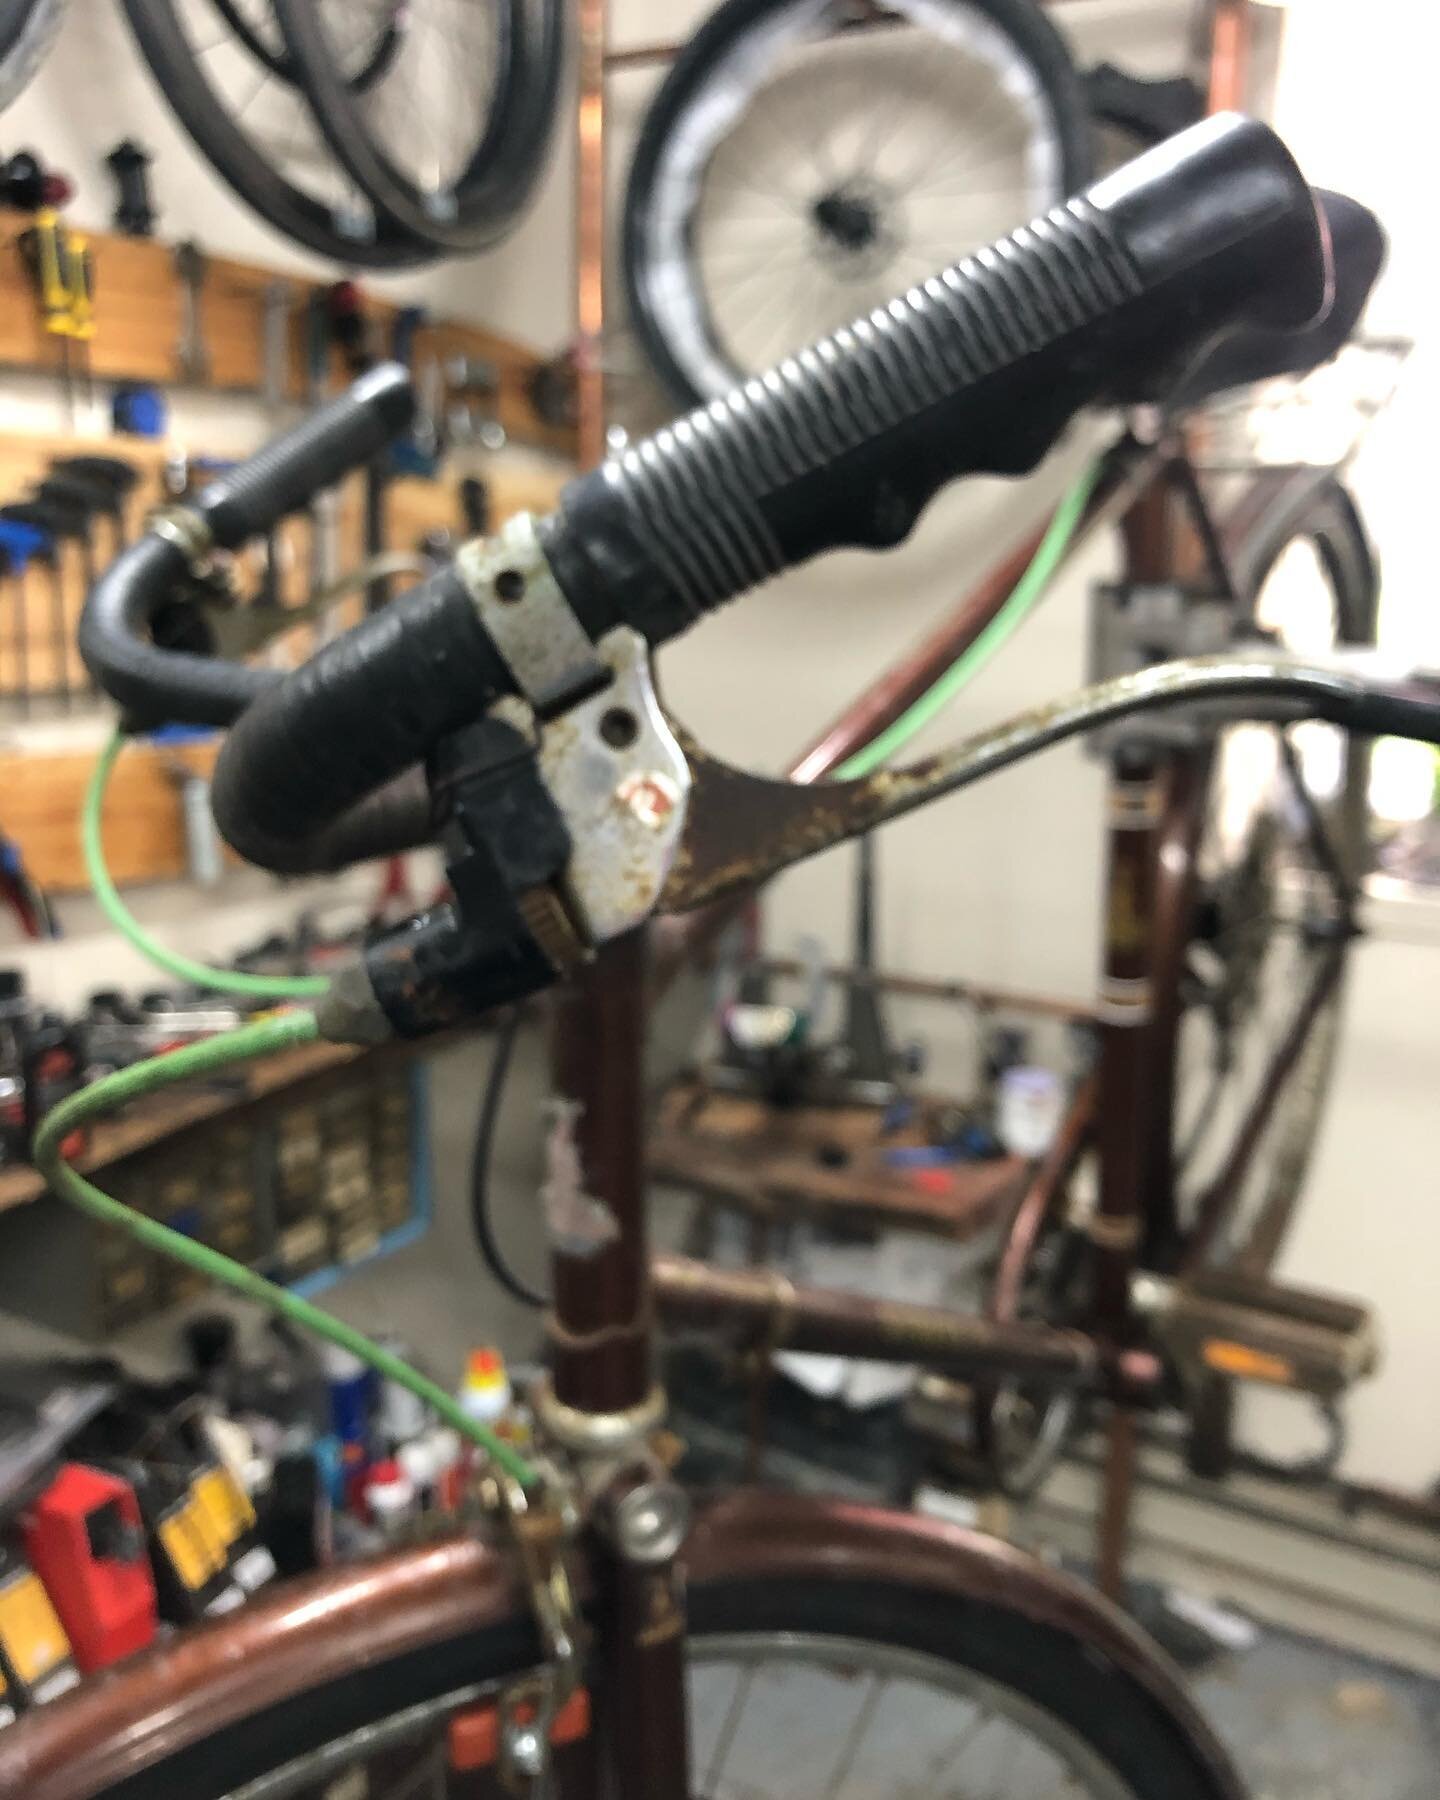 The old auto adjusters adjusted so they are back to adjusting automatically. #vintagebike #vintagebicycle